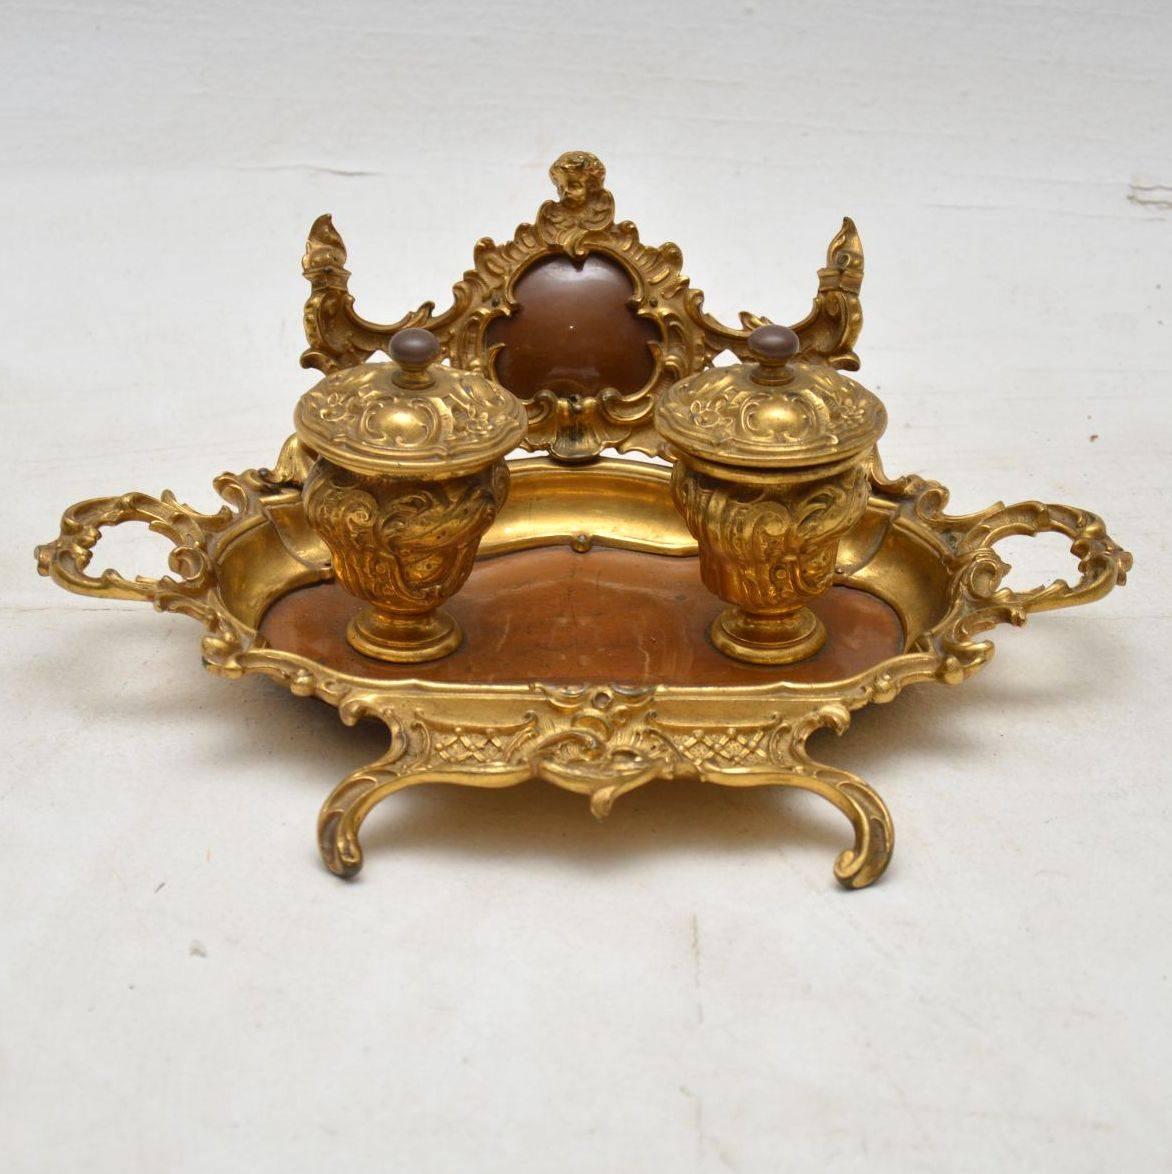 This French antique gilt bronze and polished wood inkwell stand has beautiful decoration all over and has some lovely features. Please enlarge all the images to see all the fine details. I would date this piece to around the 1860s-1880s period and